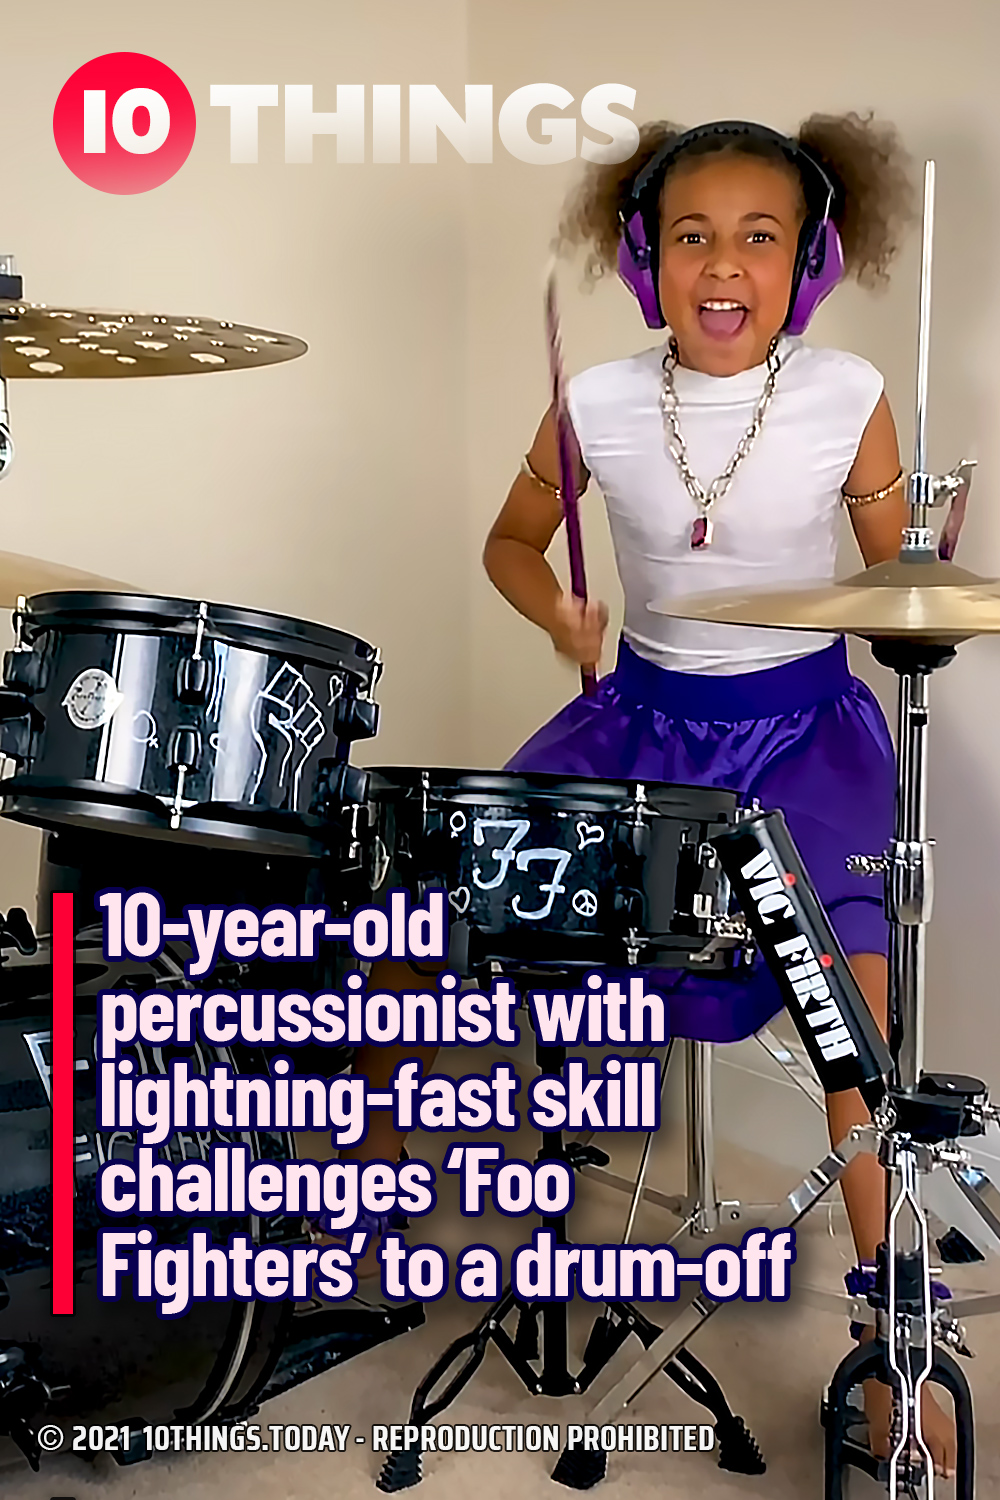 10-year-old percussionist with lightning-fast skill challenges ‘Foo Fighters’ to a drum-off